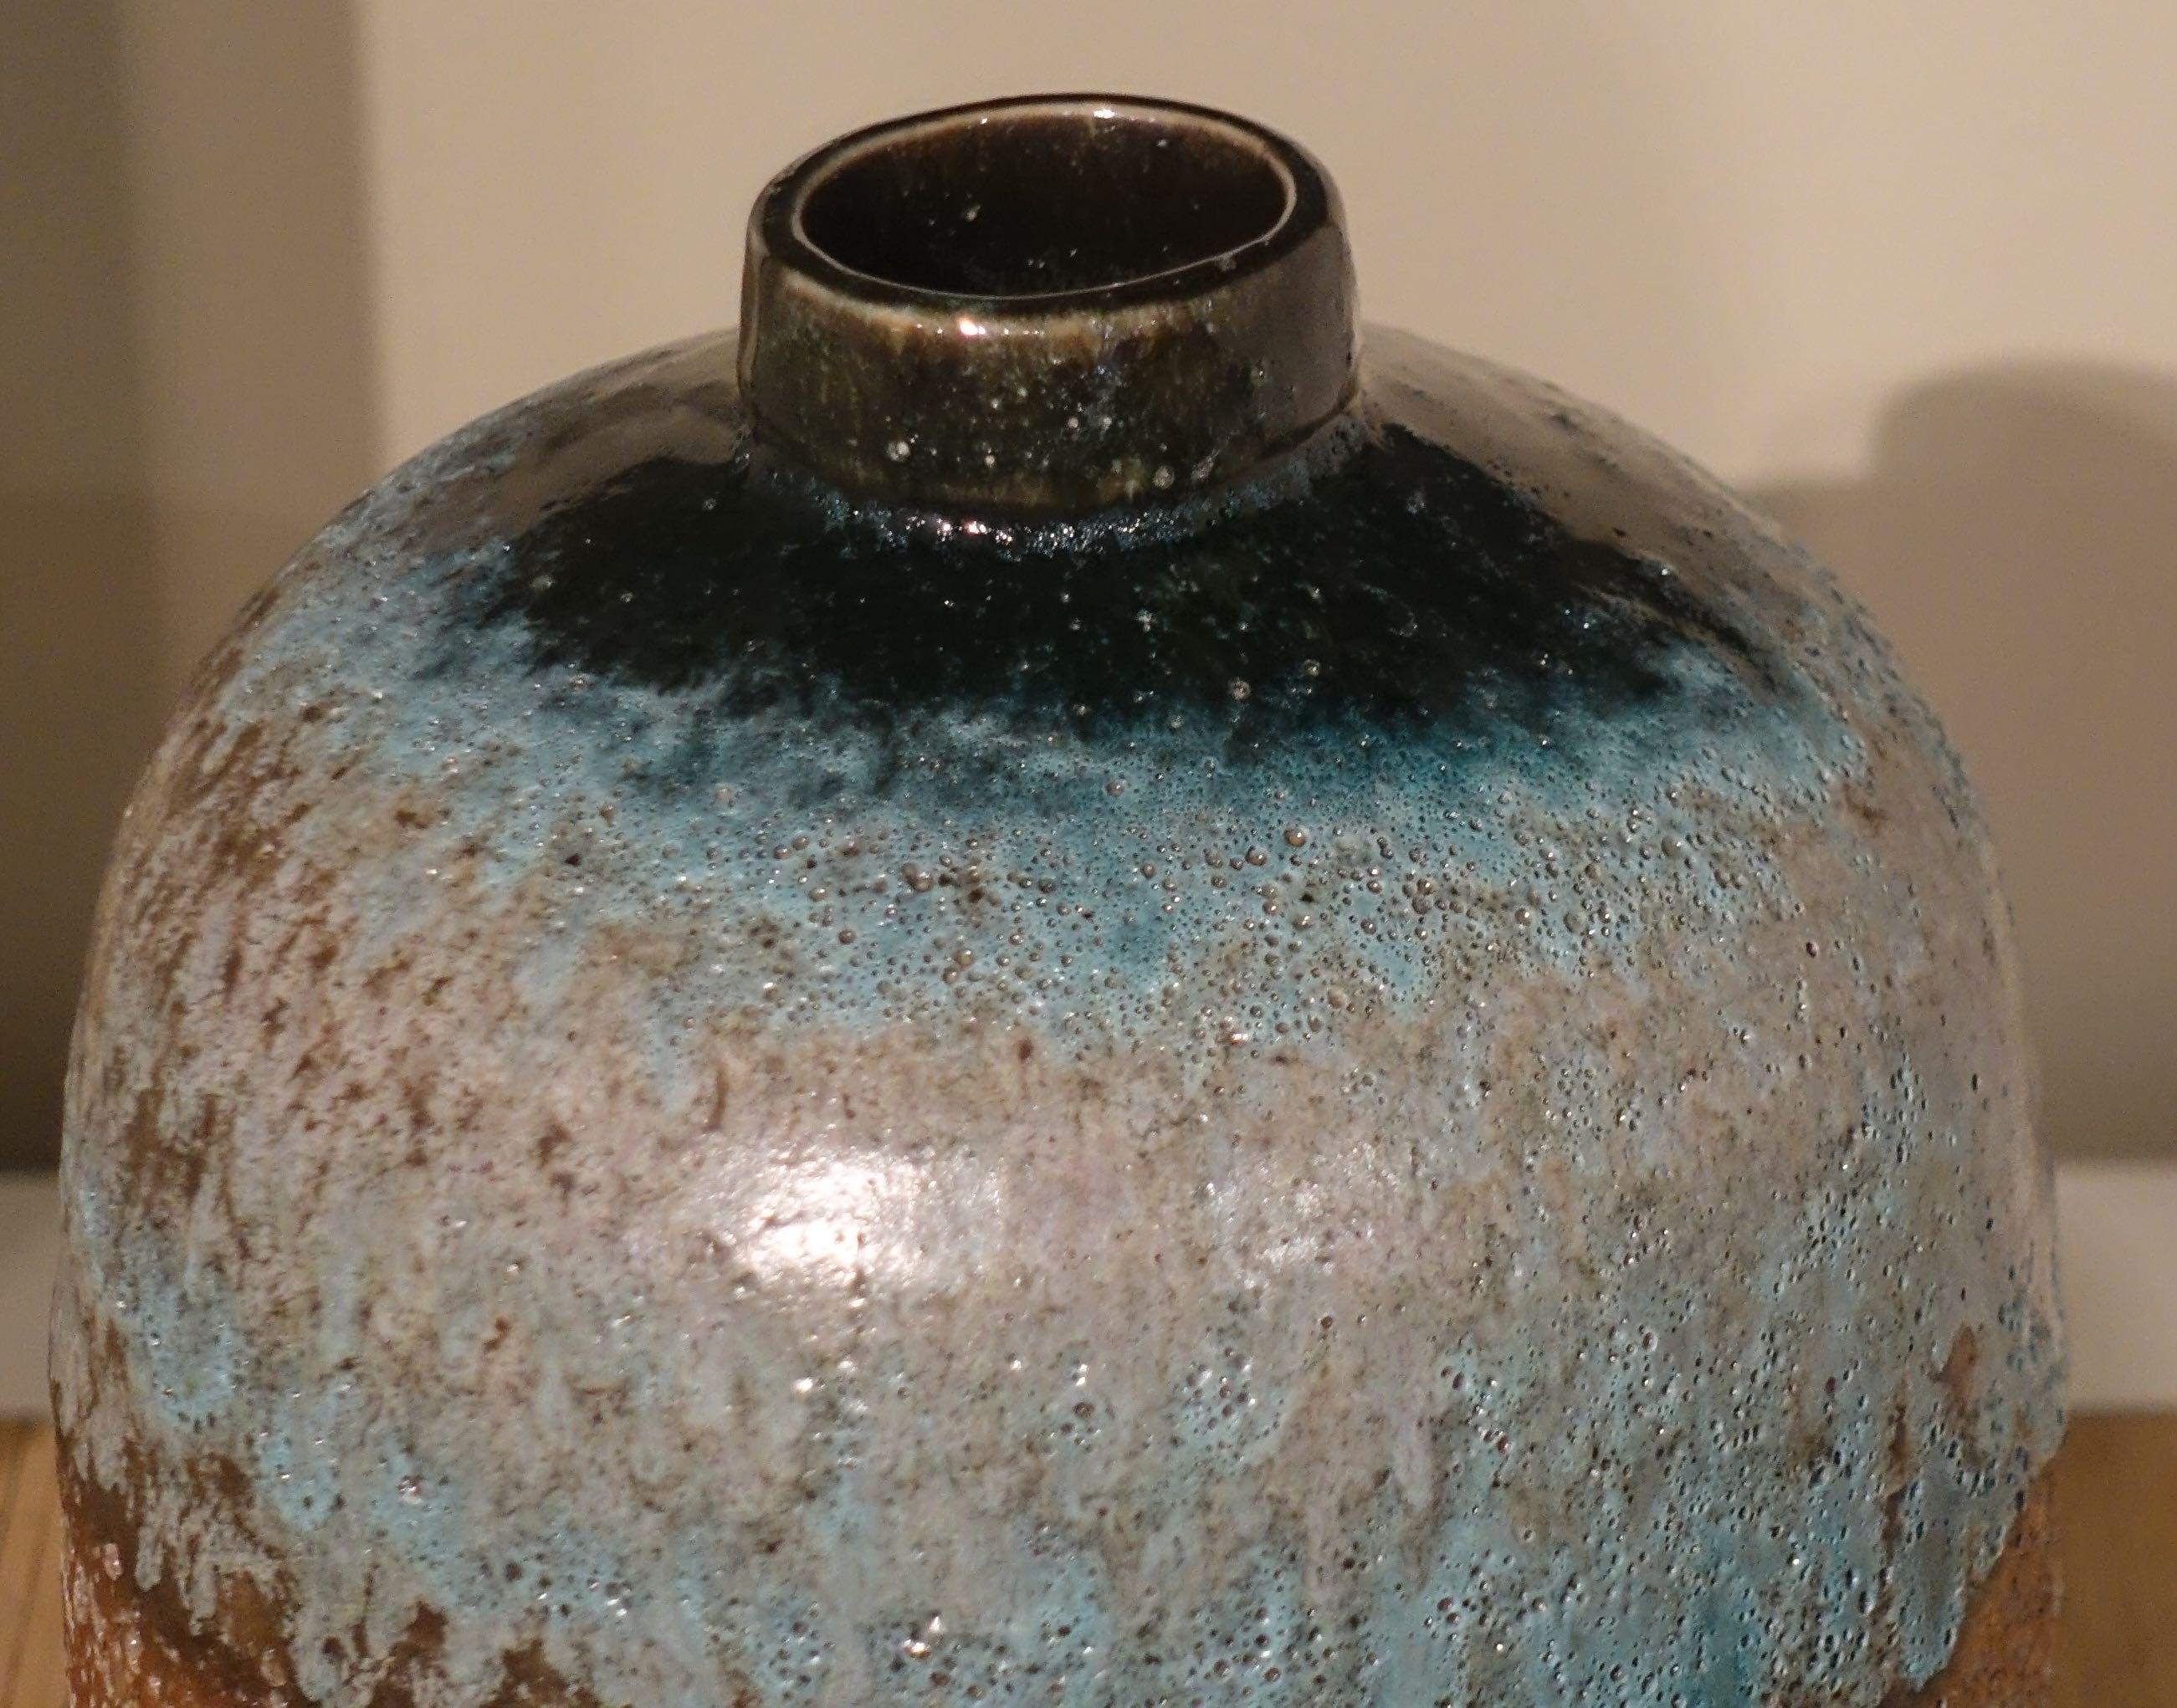 Contemporary Chinese textured volcanic glaze vase 
Sits well as part of a collection
S5141/2/3/5
